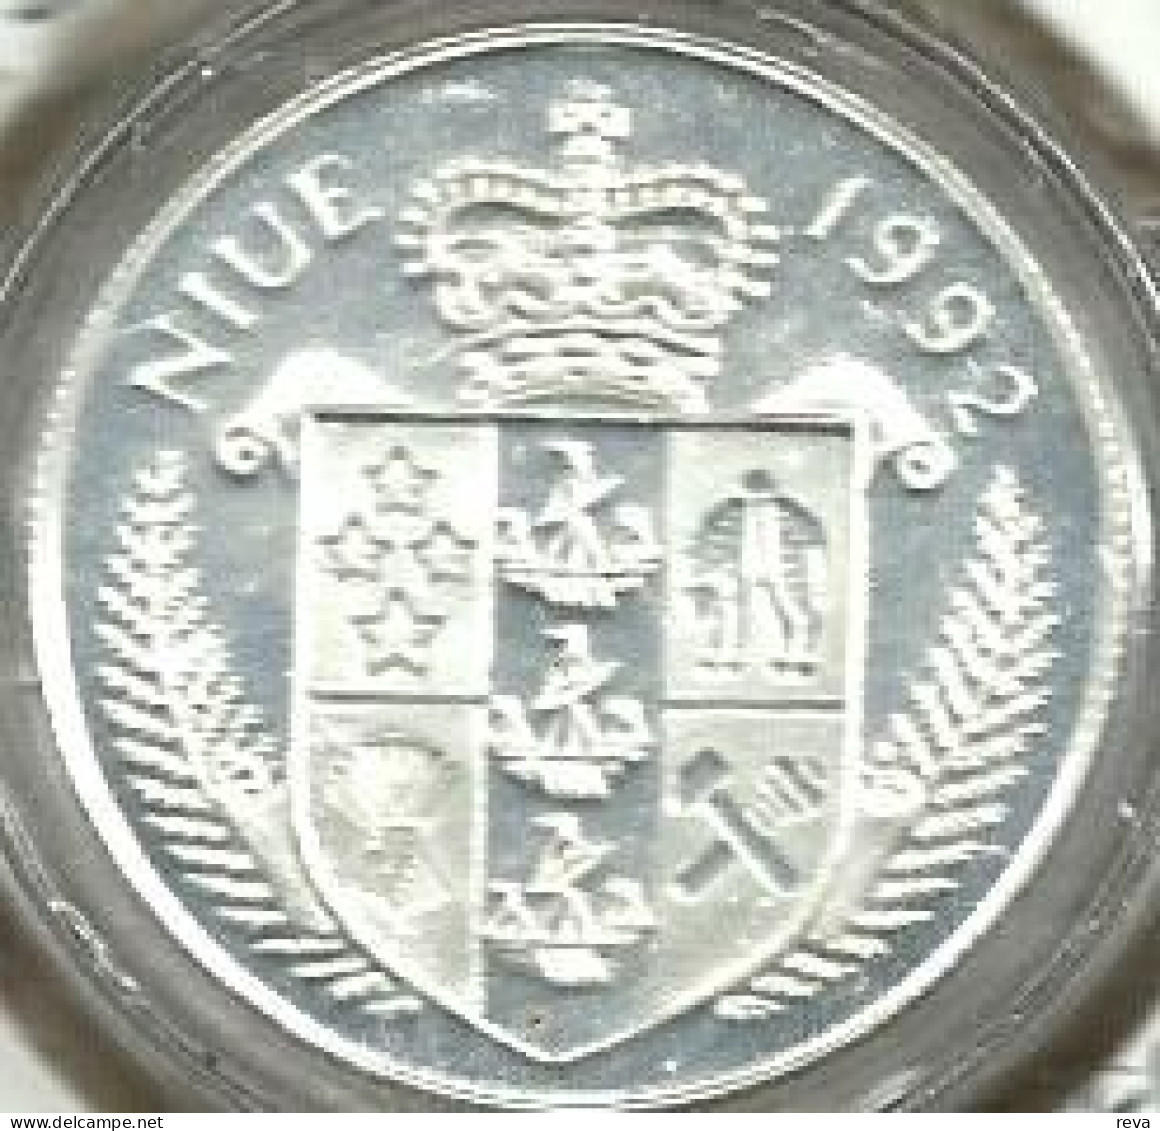 NIUE $5 CROWN SHIP EMBLEM FRONT RUNNER OLYMPIC GAMES 1996 BACK 1992 AG SILVER PROOF KM? READ DESCRIPTION CAREFULLY !!! - Niue